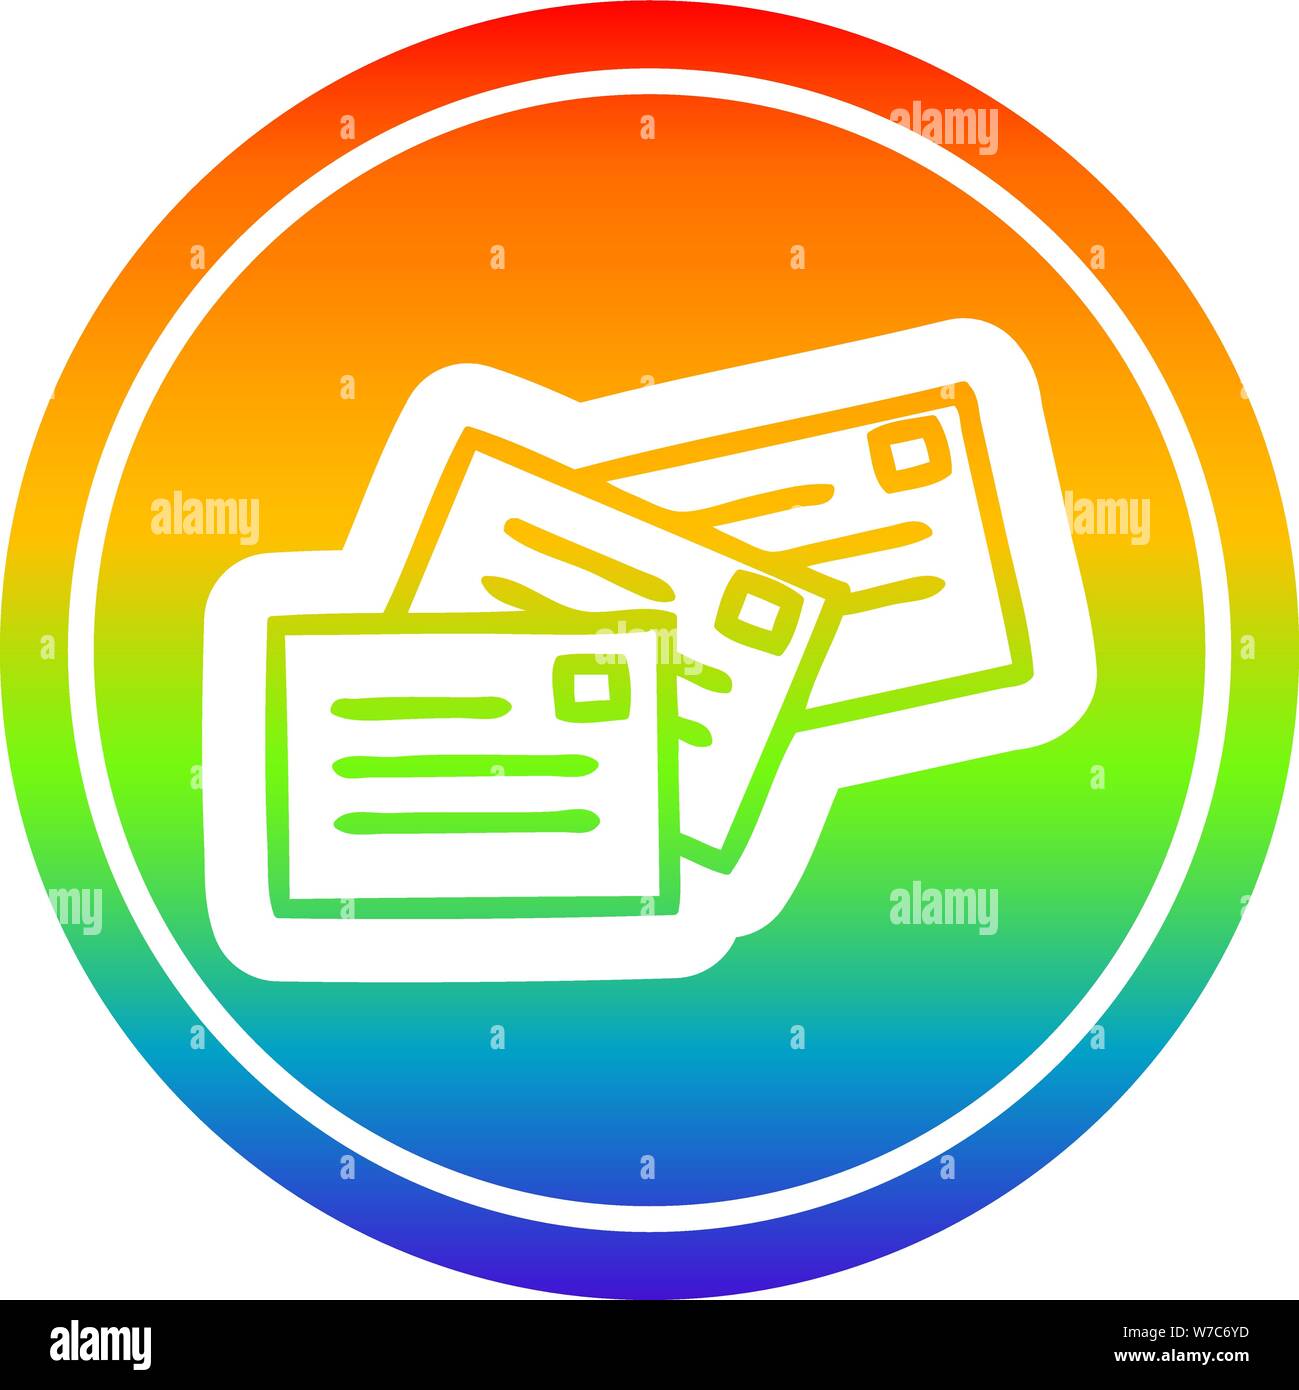 stack of letters circular icon with rainbow gradient finish Stock Vector